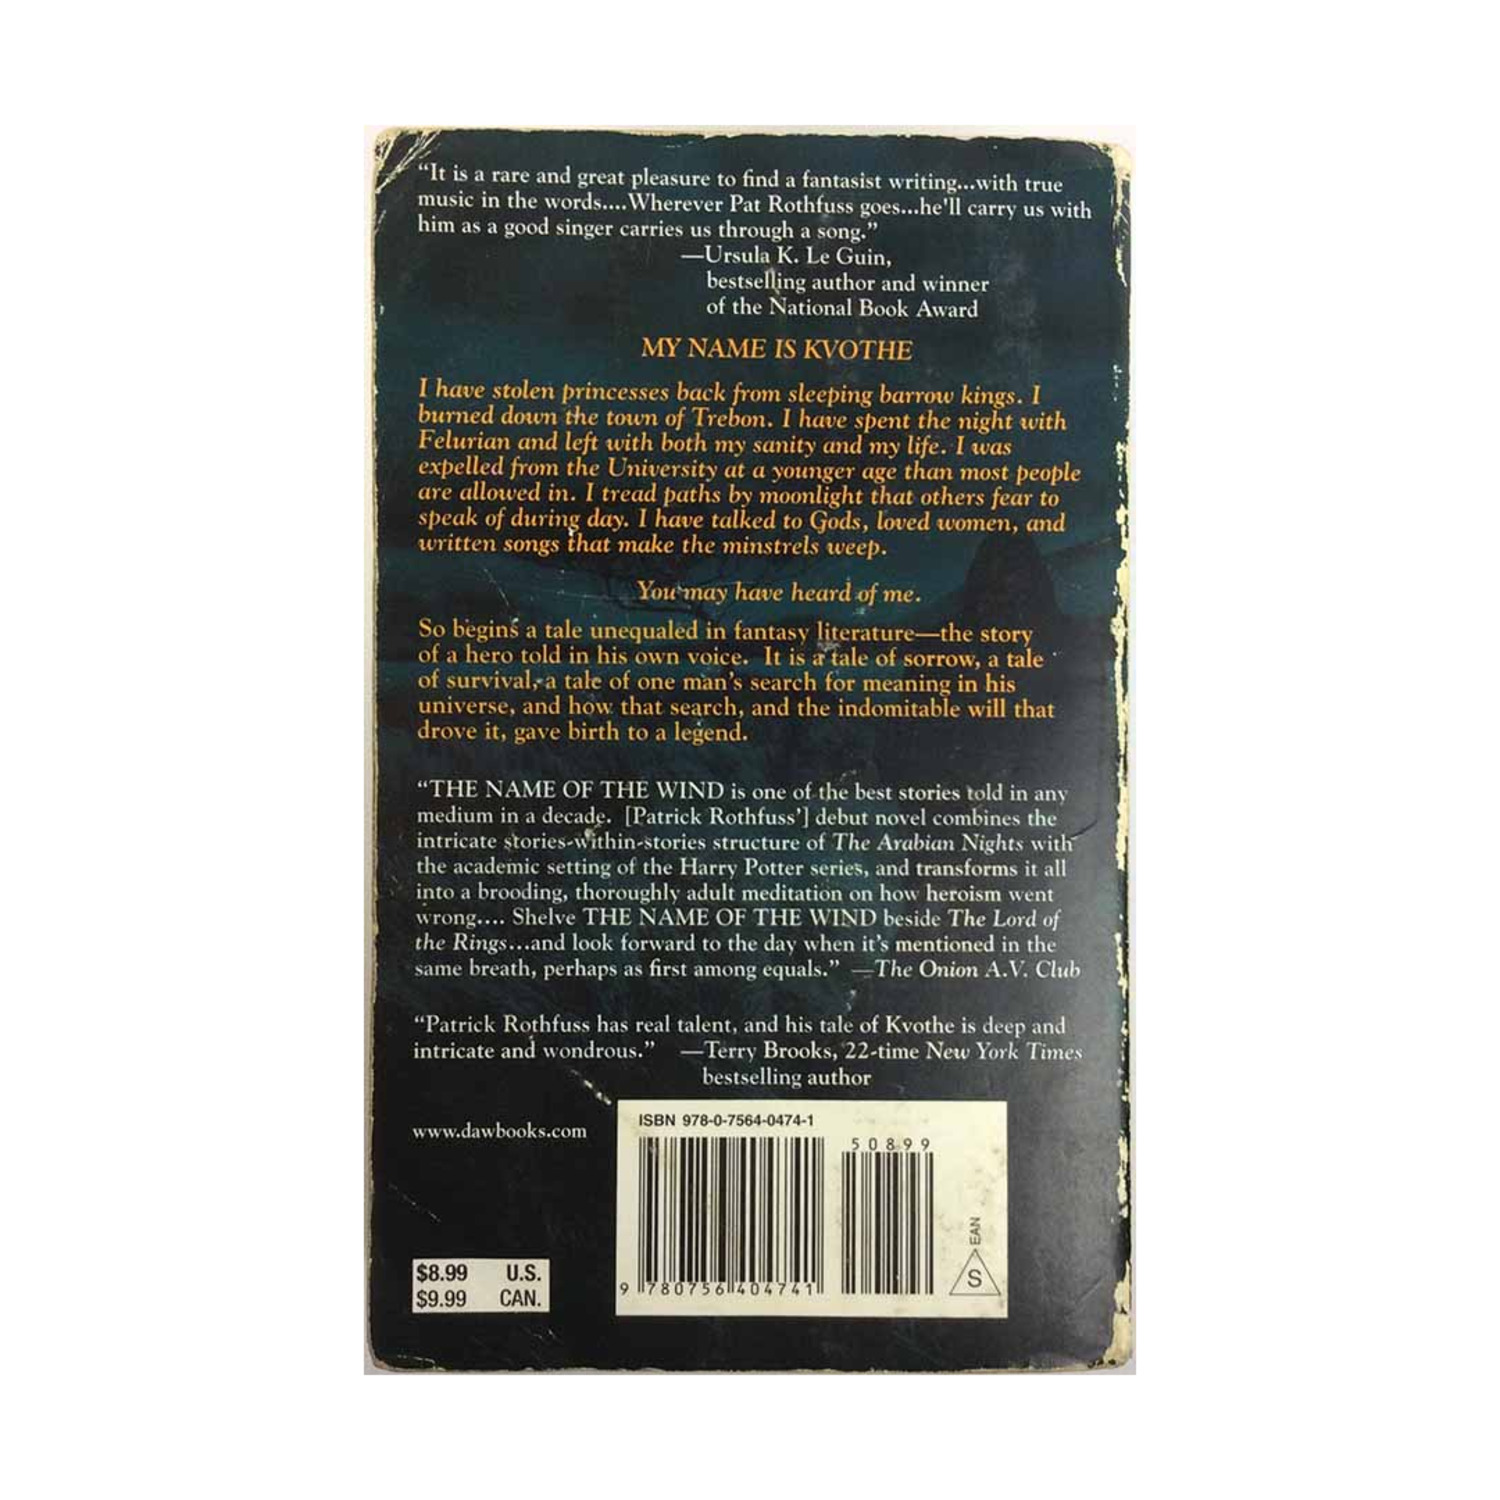 Kingkiller Chronicle: The Name of the Wind (Paperback) - image 2 of 2